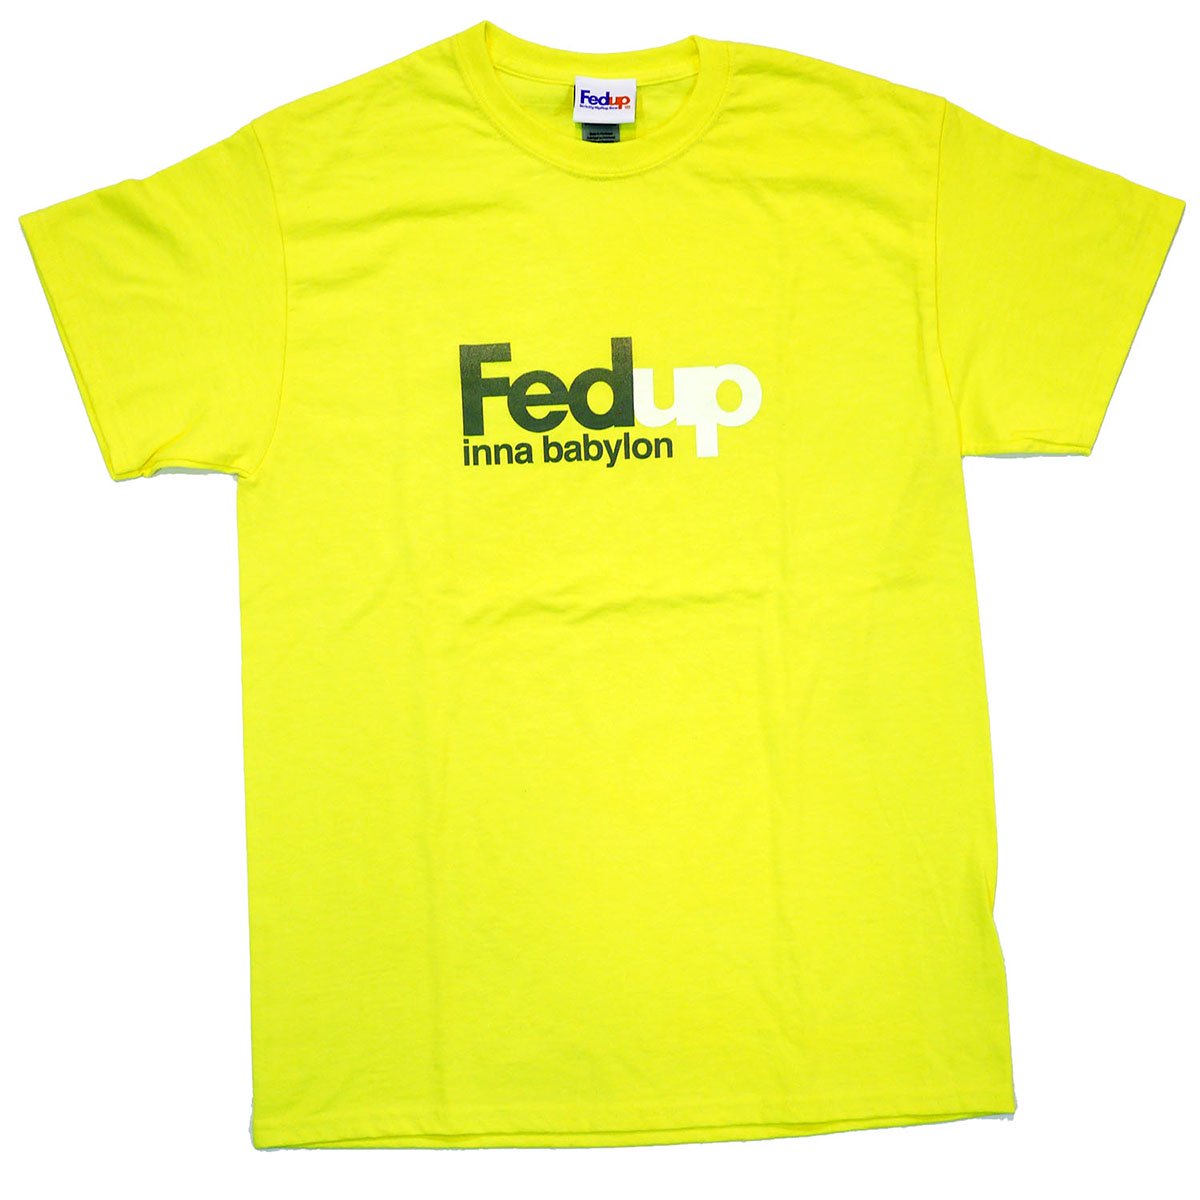 Fedup | HIPHOP WEAR | <img class='new_mark_img1' src='https://img.shop-pro.jp/img/new/icons6.gif' style='border:none;display:inline;margin:0px;padding:0px;width:auto;' />Fedup 